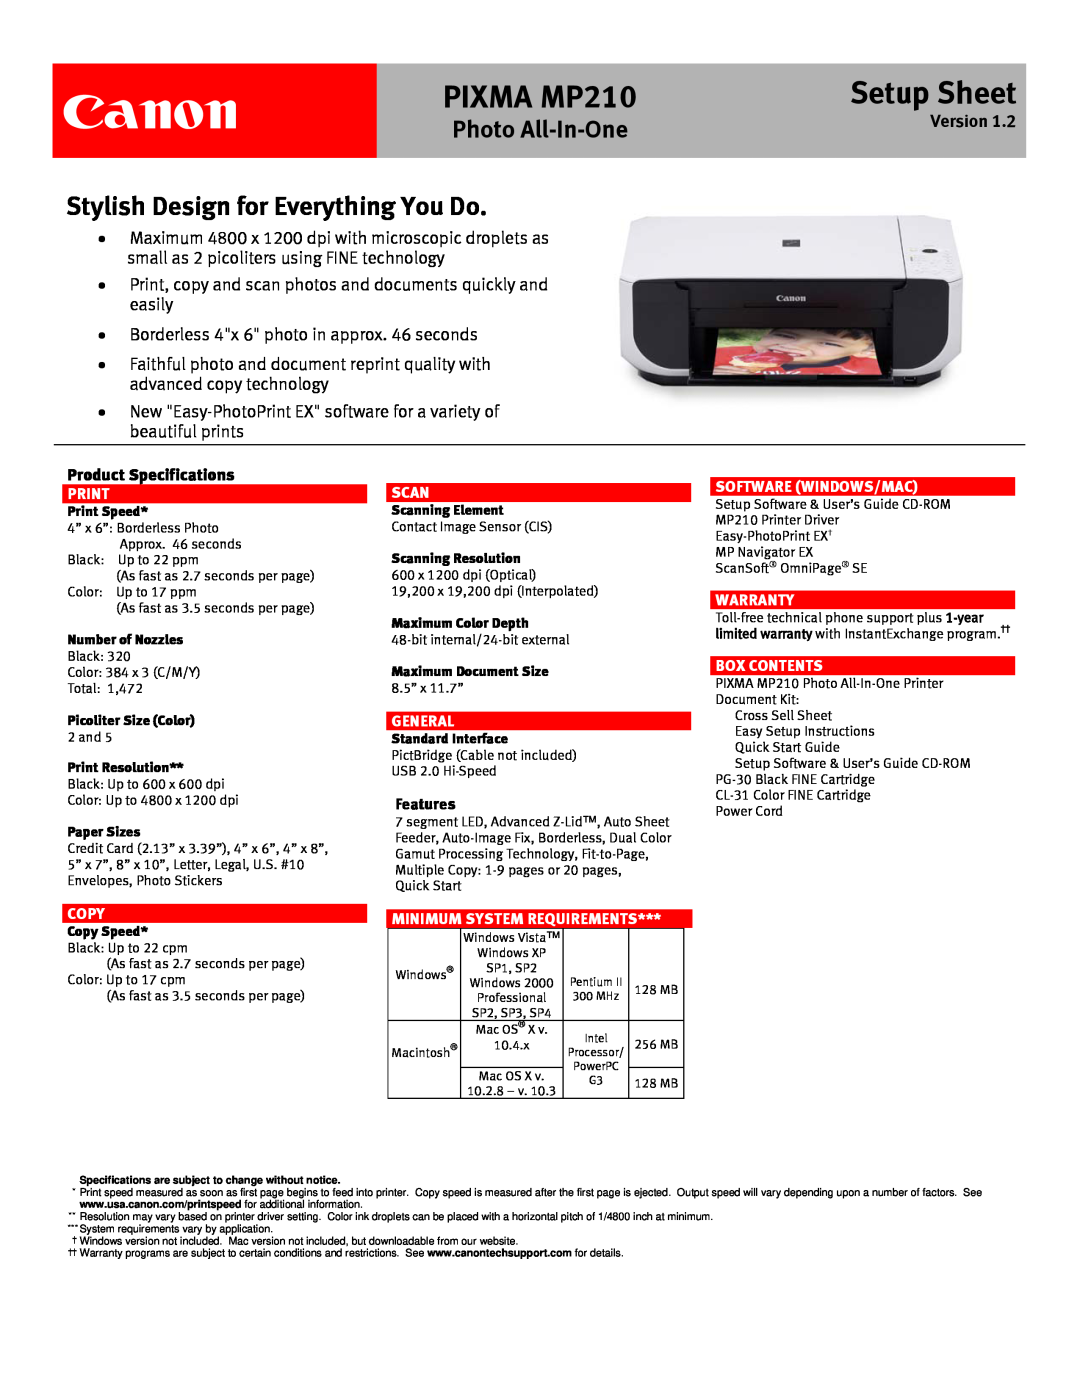 Canon warranty Canon, PIXMA MP210, Setup Sheet, Stylish Design for Everything You Do, Photo All-In-One, Version, Print 